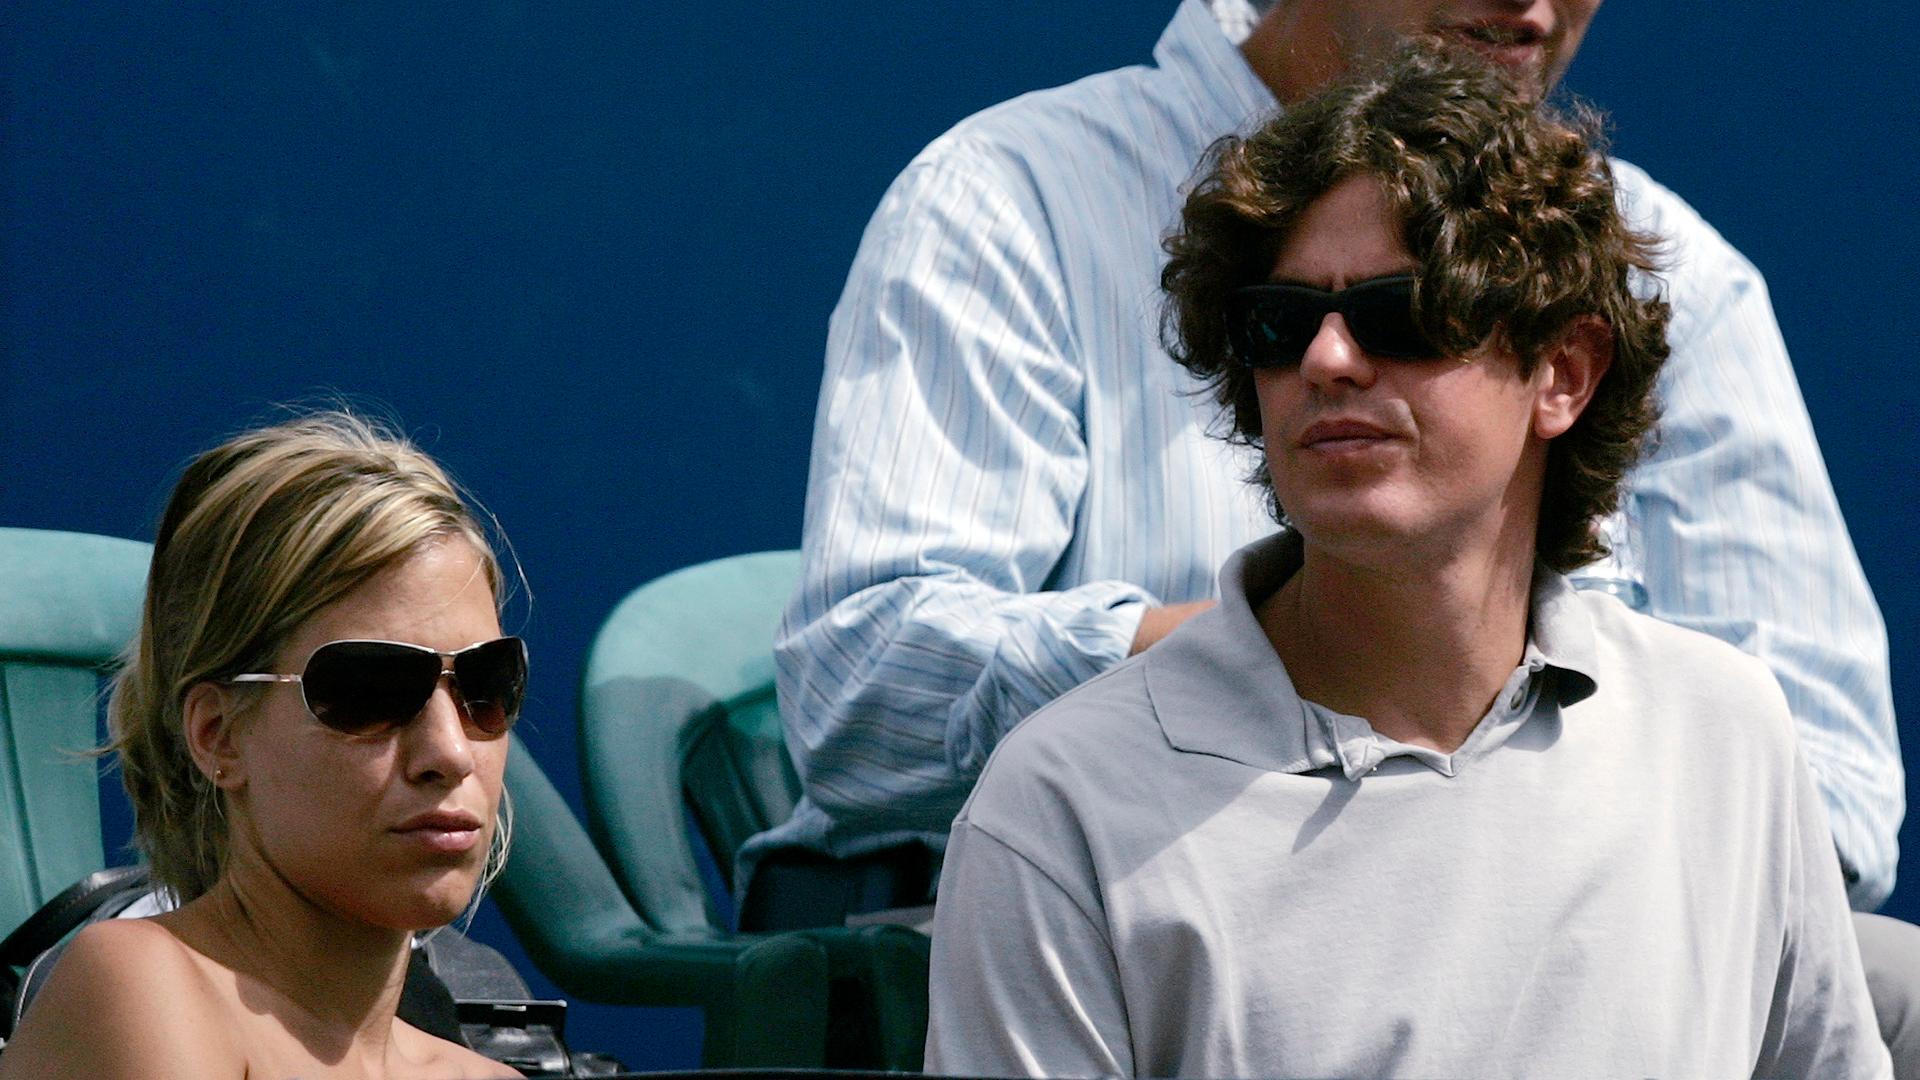 Argentina's Economy Minister Martin Lousteau and his girlfriend Anita attend the final match at the Buenos Aires Open tennis tournament between Jose Acasuso and David Nalbandian February 24, 2008.